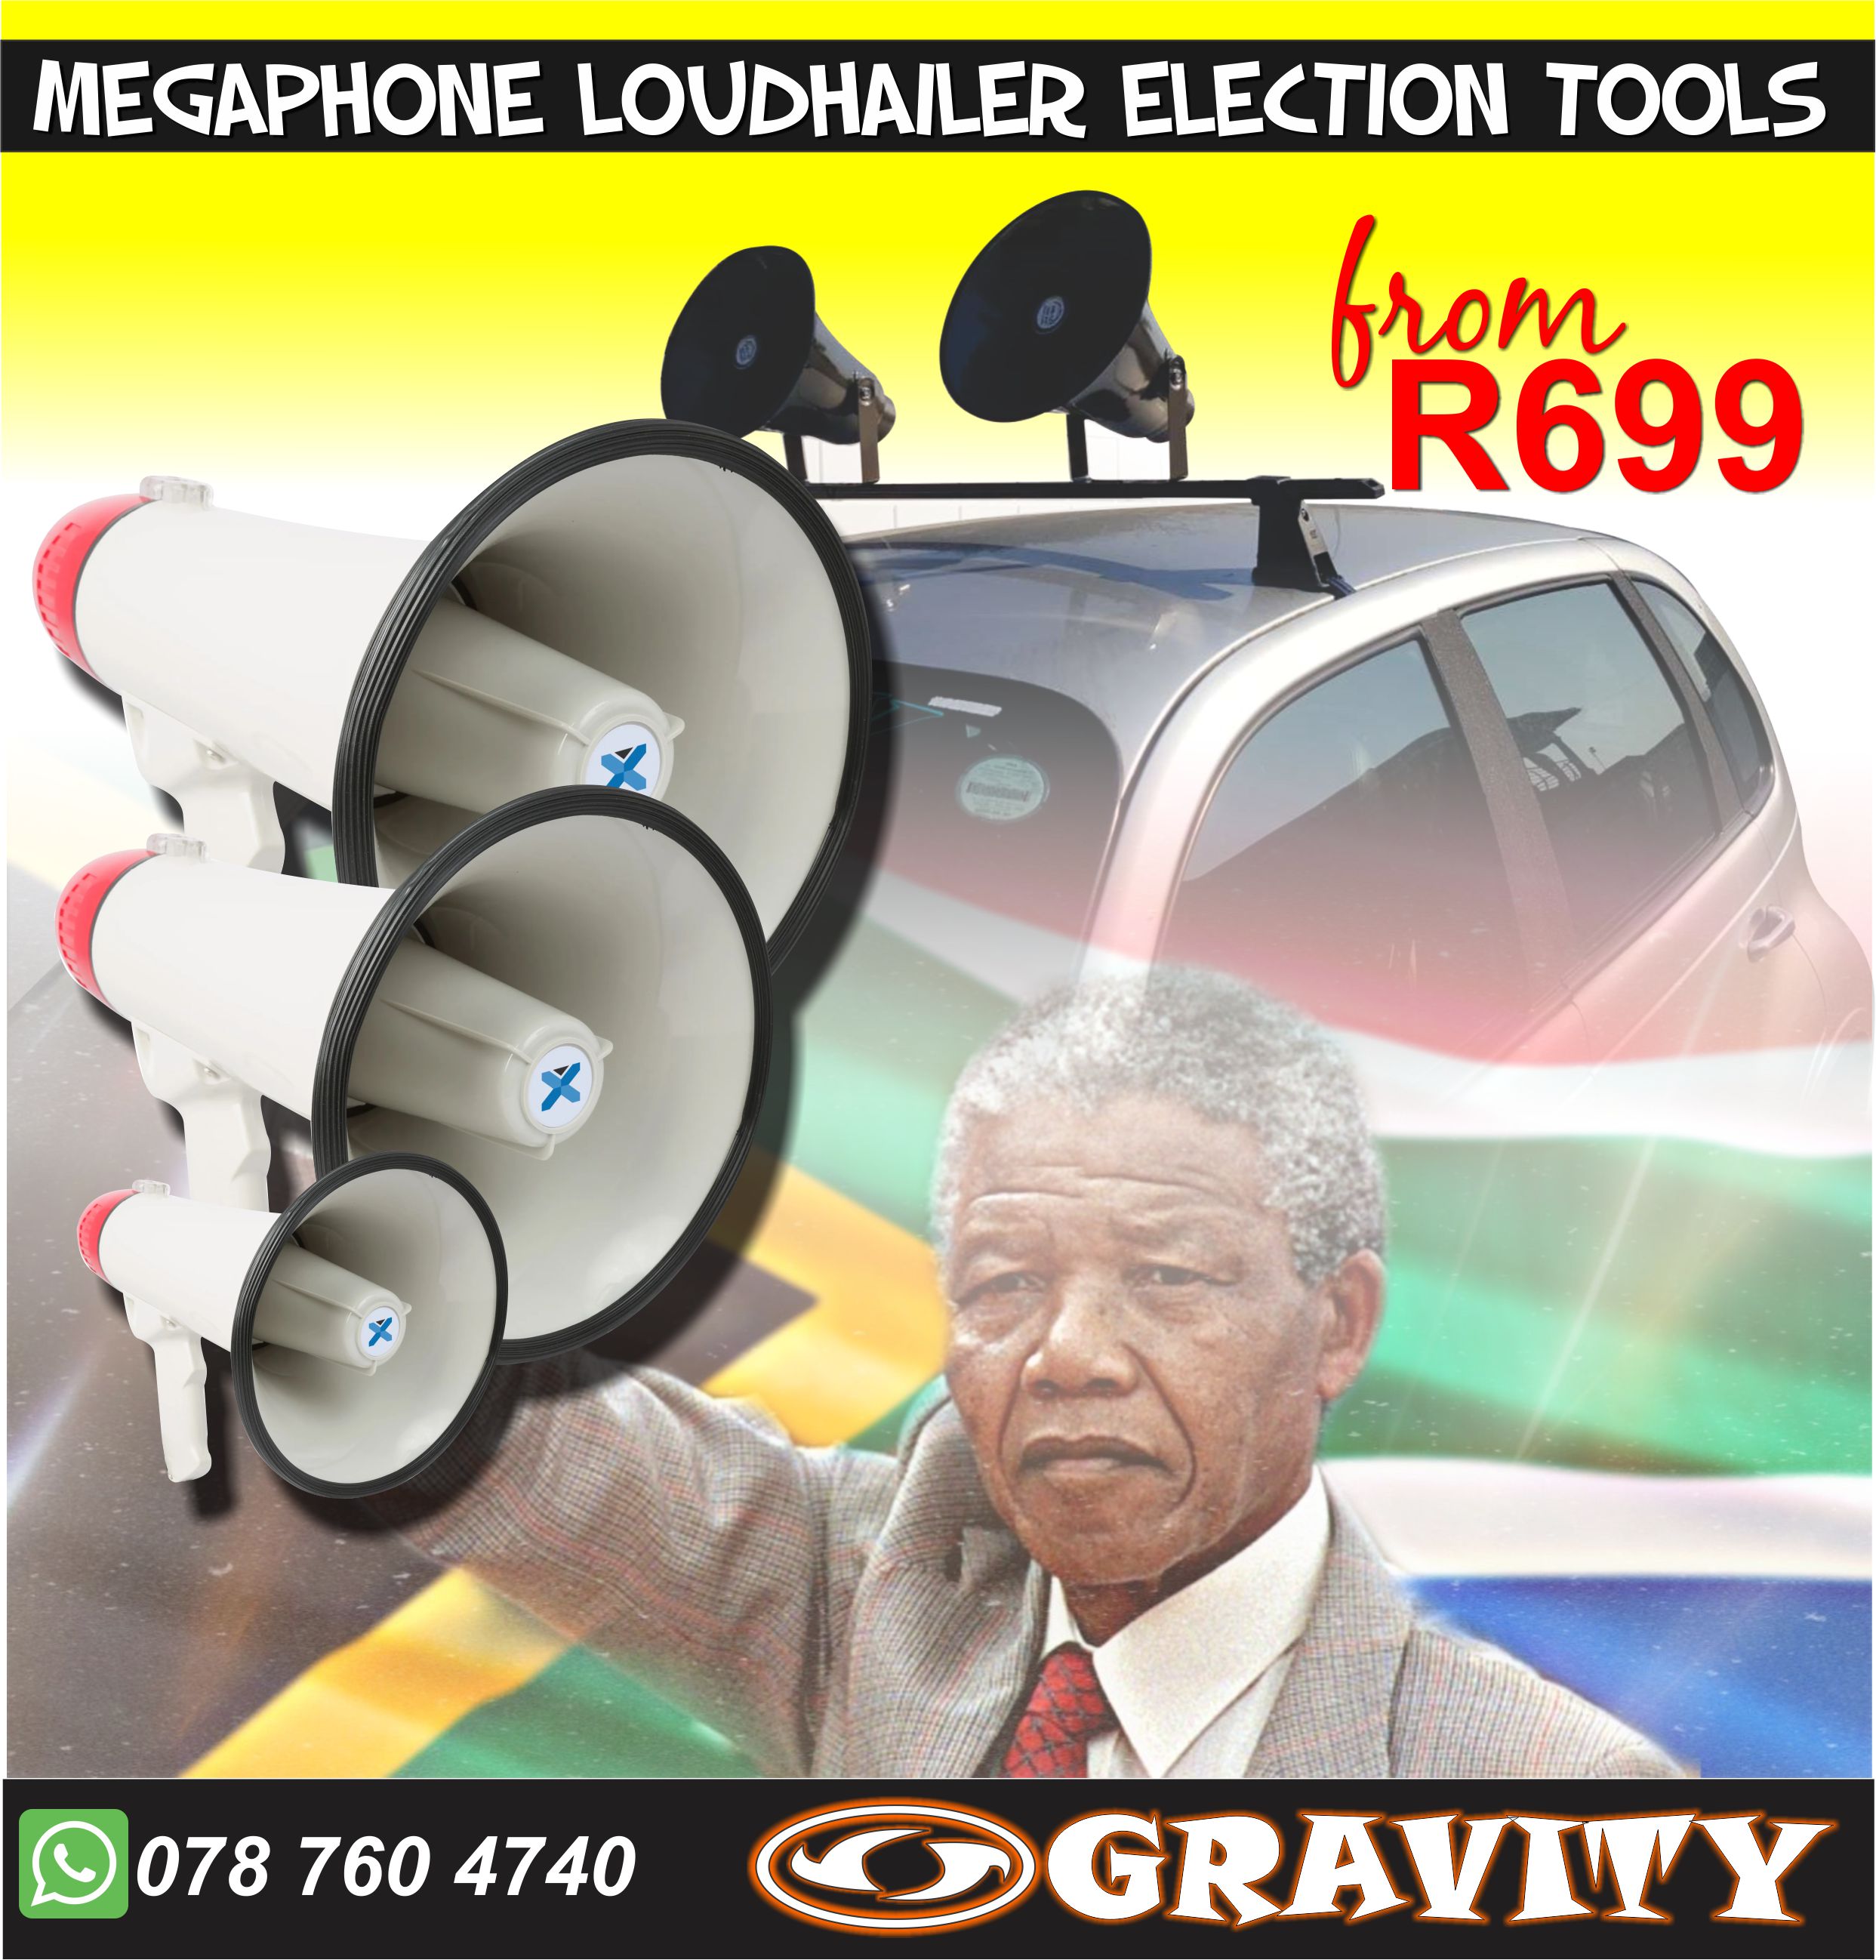 Megaphone Loudhailer Mic Speaker PUBLIC ADDRESS BROADCASTING SYSTEMS DURBAN elections megaphone loudhailer | deal megphones mic system for all your outdoor events like rallys, marches, political rallys and announcements Political Elections outdoor announcements available at gravity dj store 0315072736  0315072463  . Megaphone Loudspeaker ANC elections outdoor events announcements 0315072463  DA political elections megaphone mic speaker needed at gravity dj store 0315072463  -with handheld mic OR without  -battery operated  -12v car power compatible  -Different sizes available:    * 5w / 15w  25w / 40w  loudspeaker horn loud hailer megaphone...`CALL STORE FOR AVAILABILITY  -sling strap carry about loudspeaker   -portable loudspeaker megaphone  -outdoor handheld mobile loudspeaker  Megaphones, loudhailers, and pa amplifiers used in public hearings, schools and elections a system of microphones, amplifiers, and loudspeakers used to amplify speech or music in a large building or at an outdoor gathering.This article is about audio systems. For public IP addresses, see IP address.Durable sound for events, evacuation, meetings and political rallies. Professional advice is free and is a phone call away Megaphone  From Wikipedia, the free encyclopedia This article is about the amplification device. For the chemical compound, see Megaphone (molecule). For other uses, see Megaphone (disambiguation). 